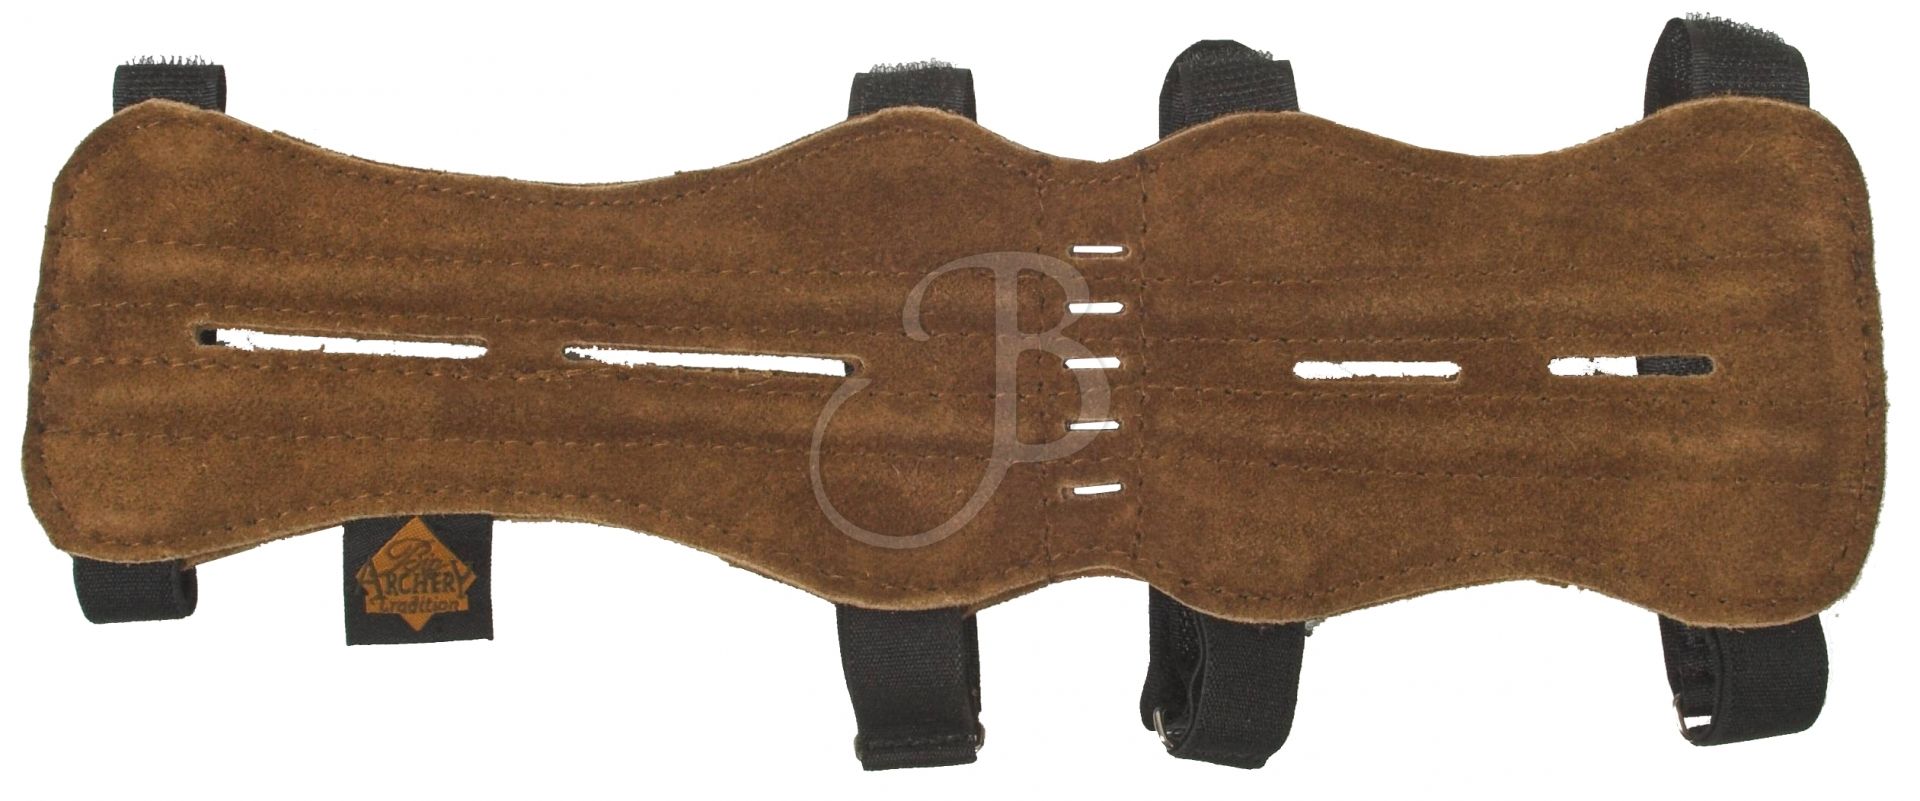 BIG TRADITION ARMGUARD LEATHER "H-H"